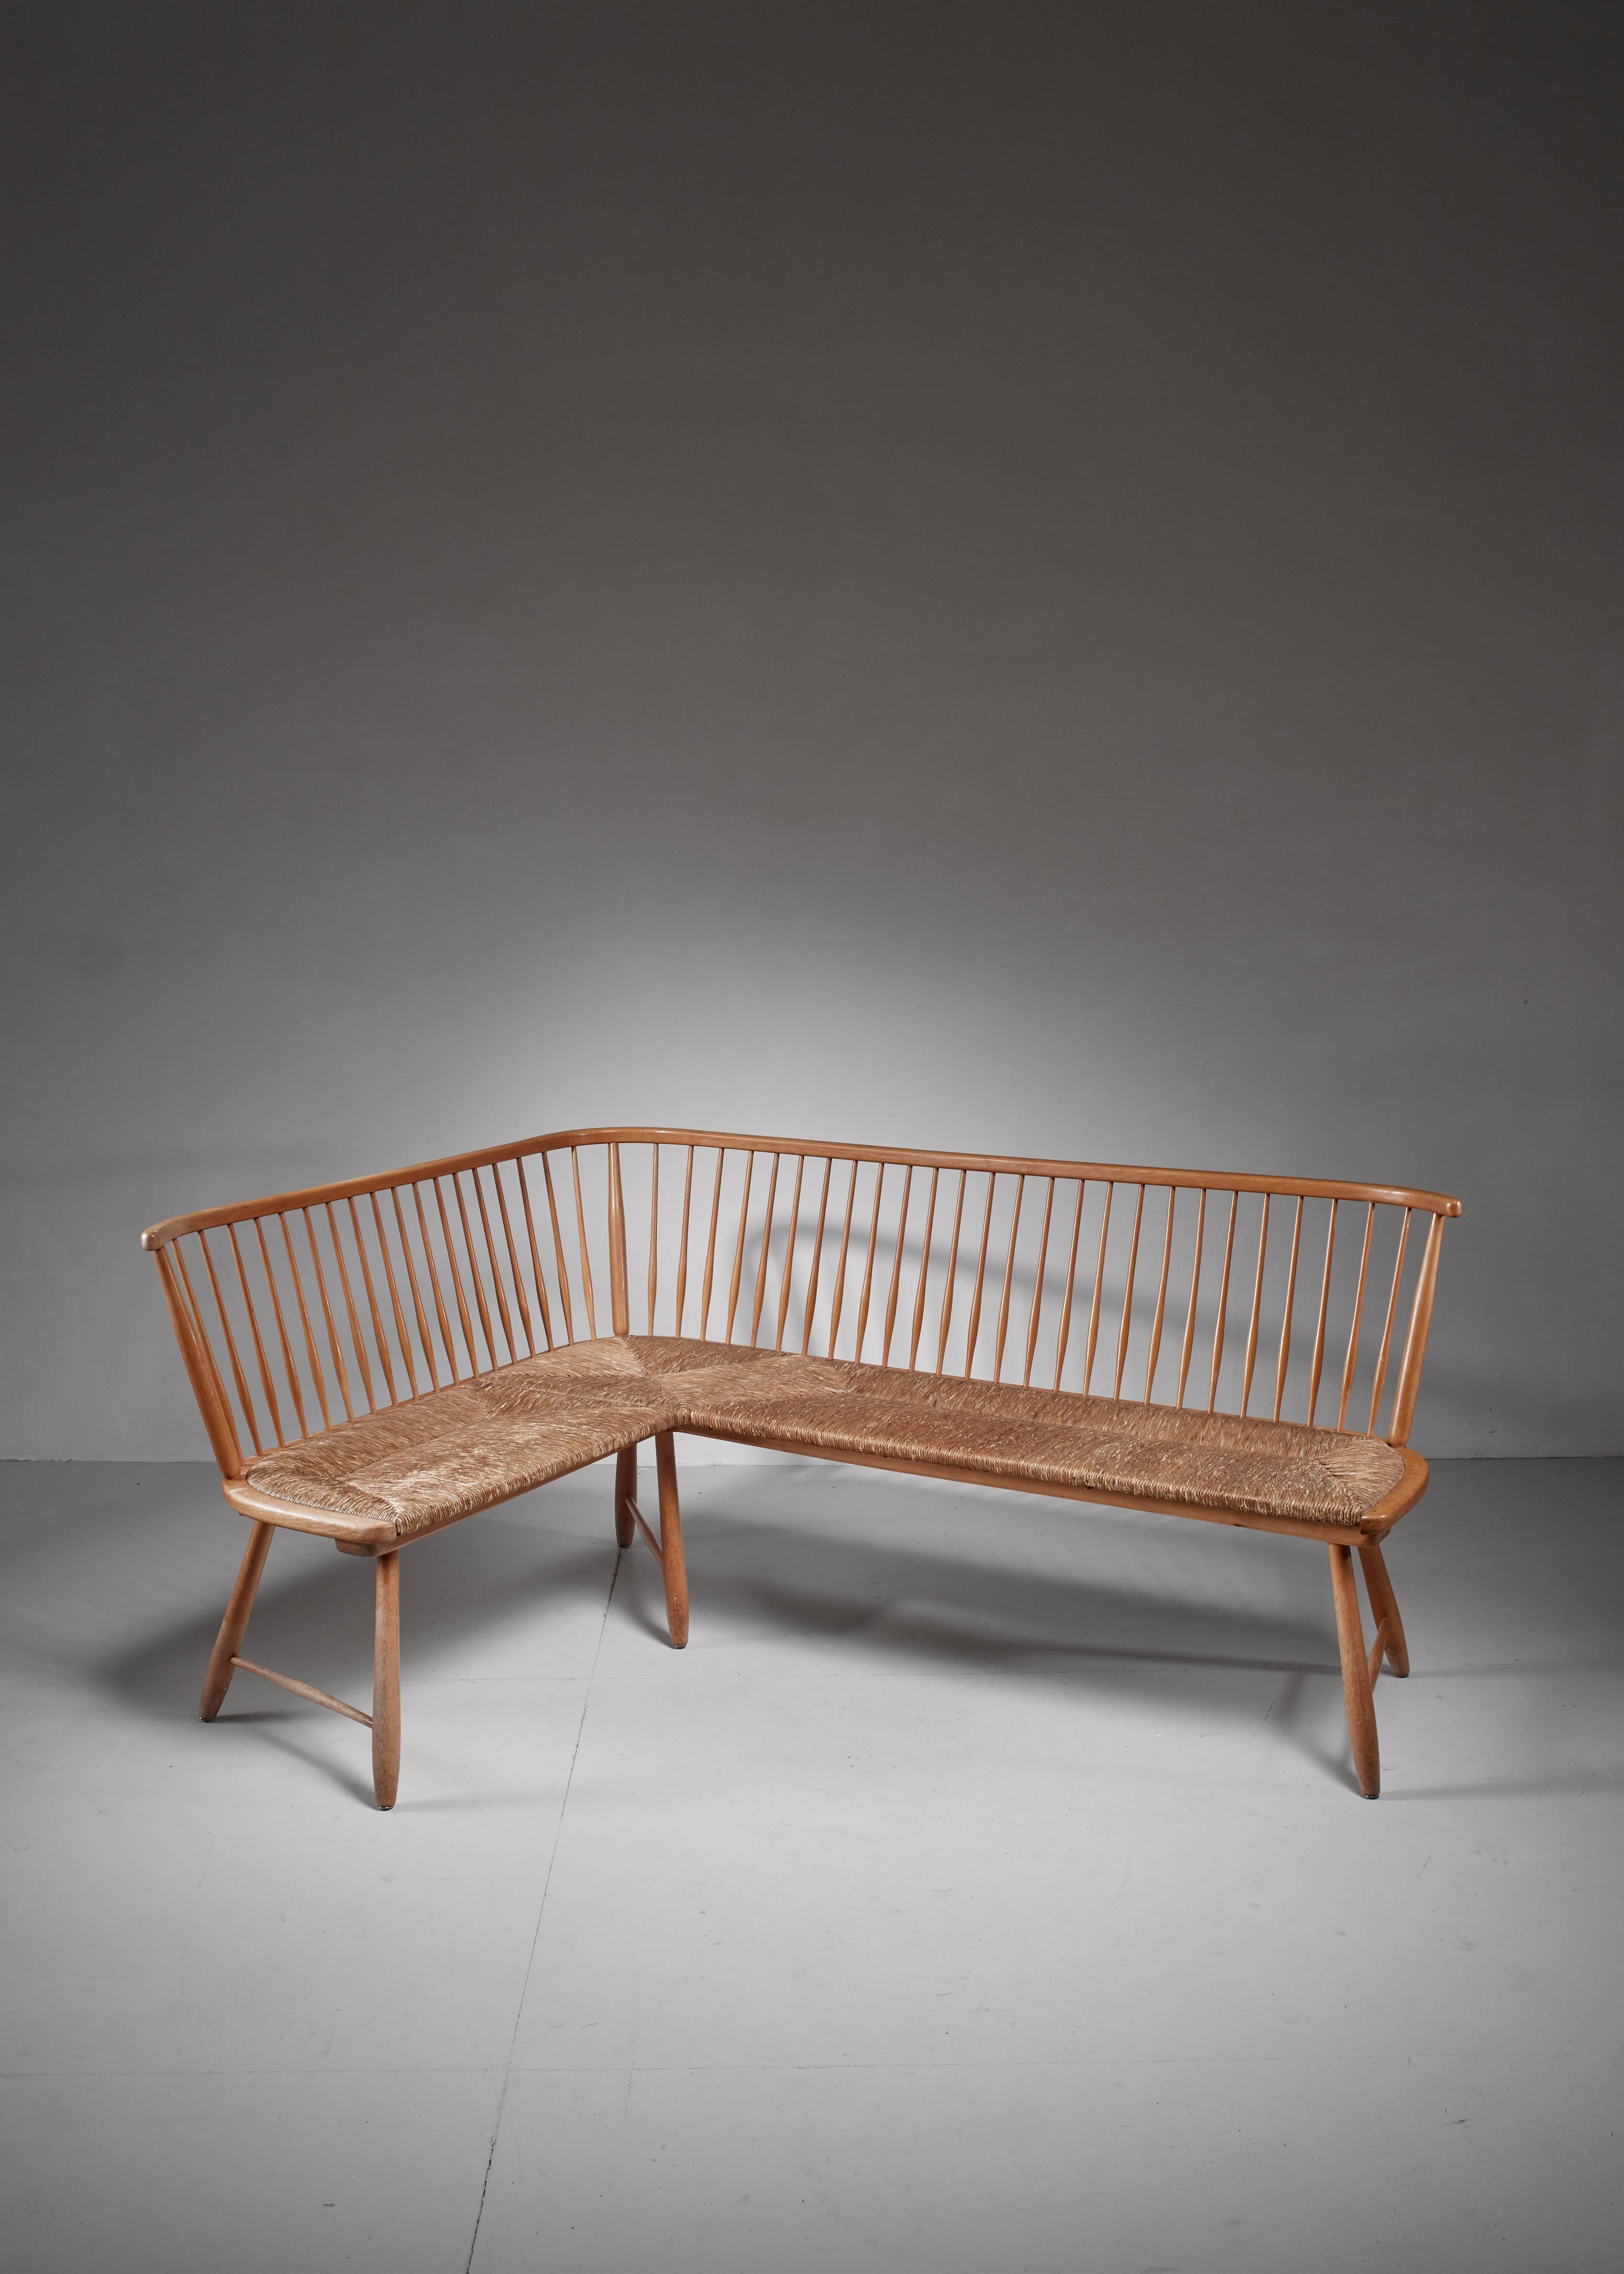 A midcentury corner bench by German architect Arno Lambrecht. The sofa is made of beech with a spindle backrest and a woven cane seating in a perfect condition.

Its simplicity and honest elegance combines with midcentury and Scandinavian modern.